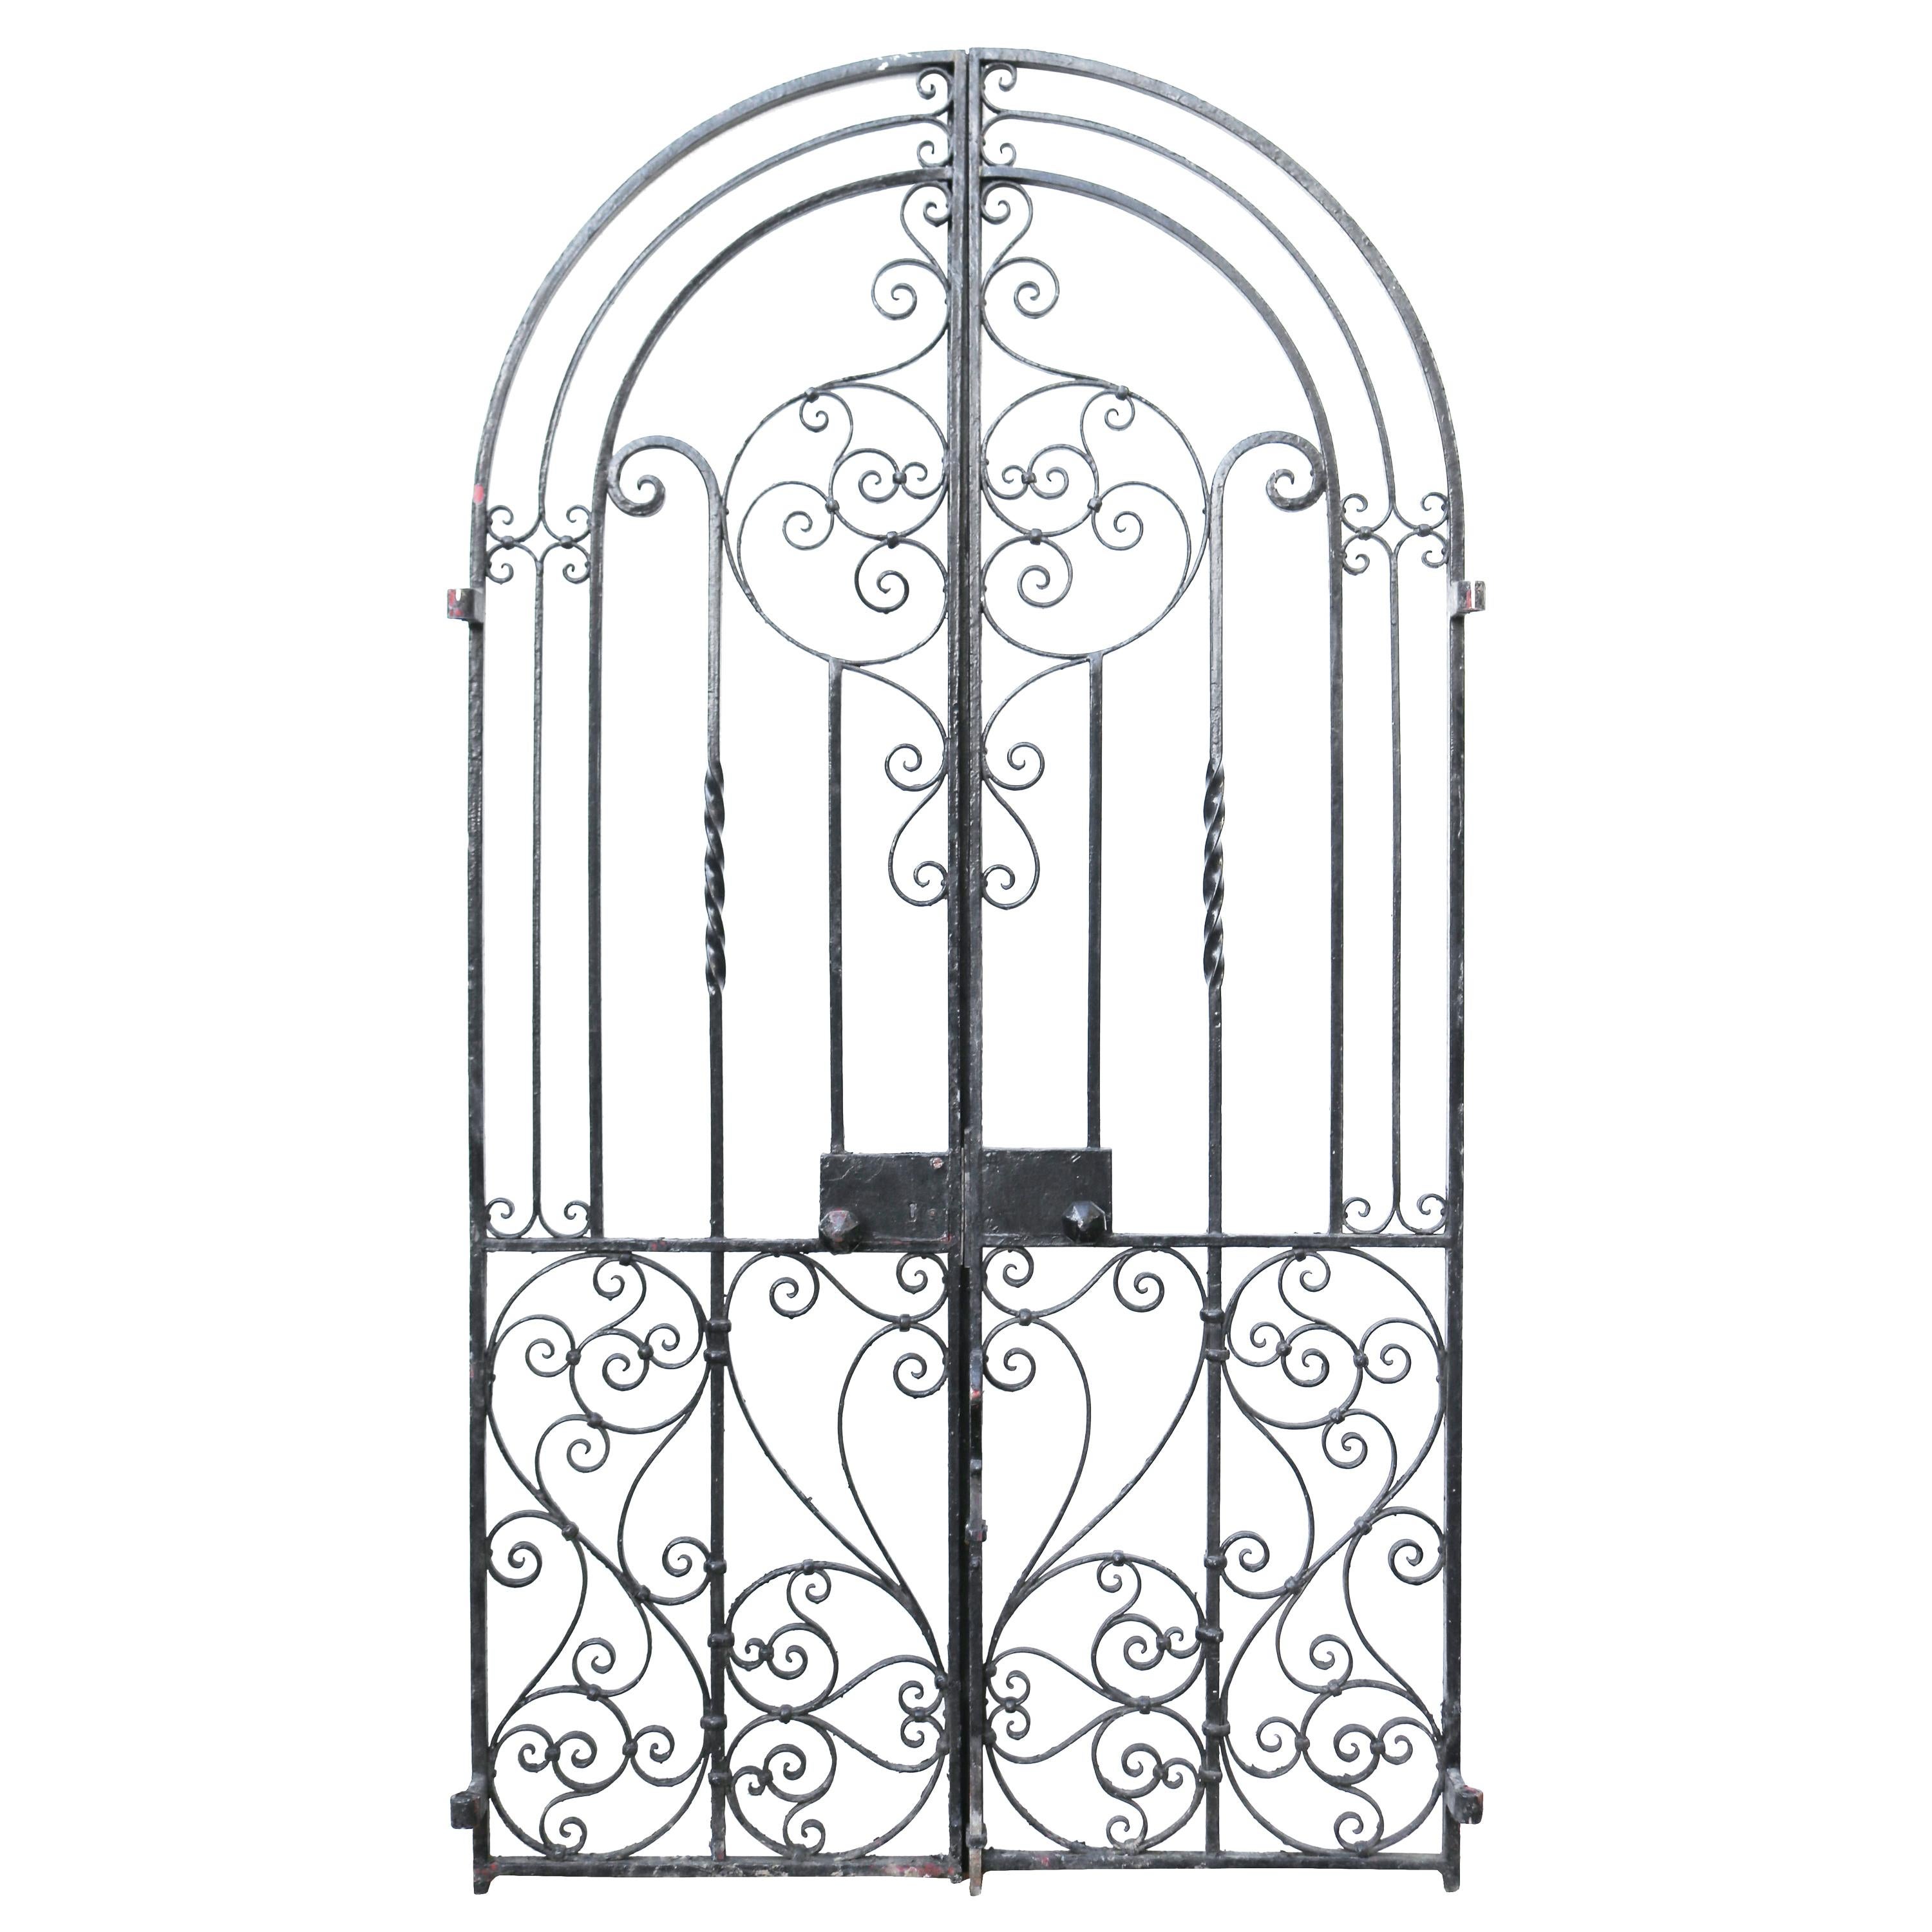 An Antique Arched Wrought Iron Garden Gate